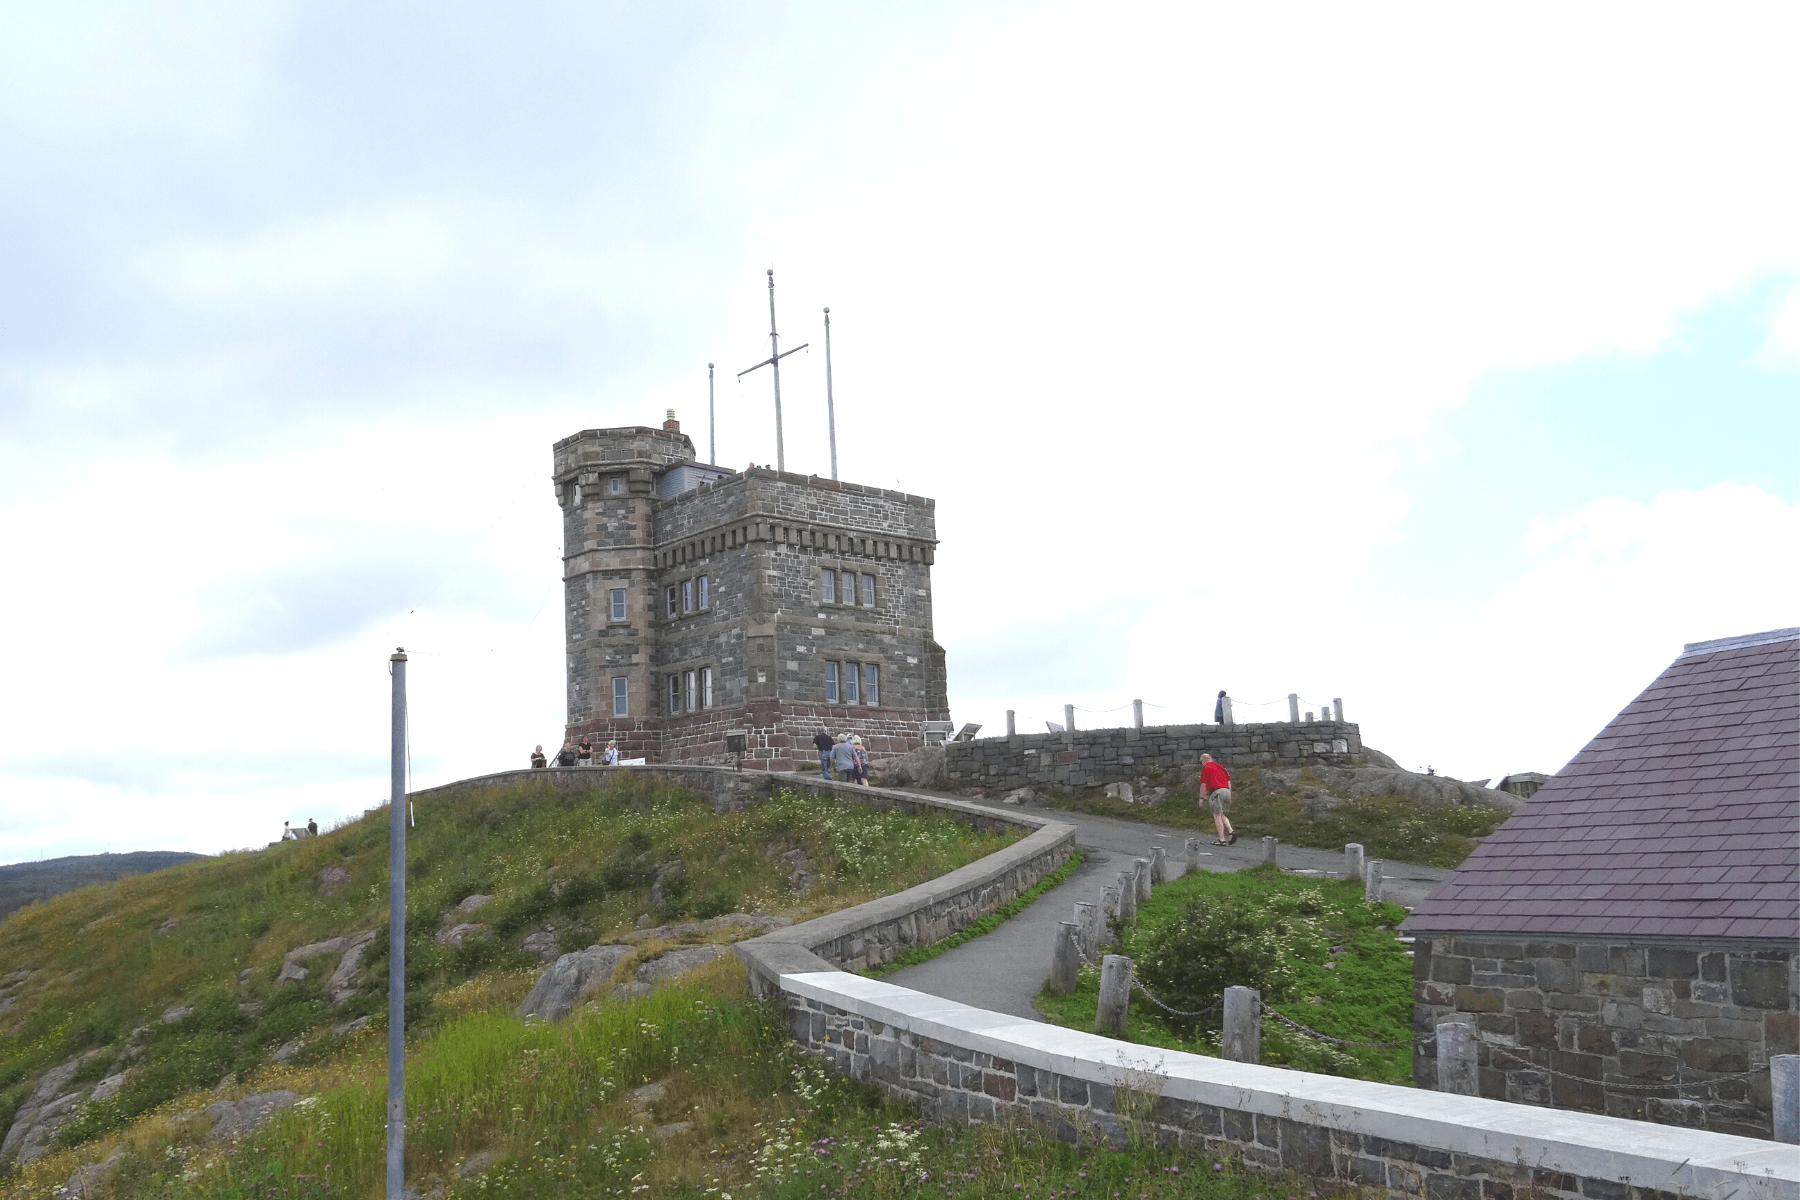 https://res.cloudinary.com/see-sight-tours/image/upload/v1581438871/Signal-Hill-St-Johns-Newfoundland.png